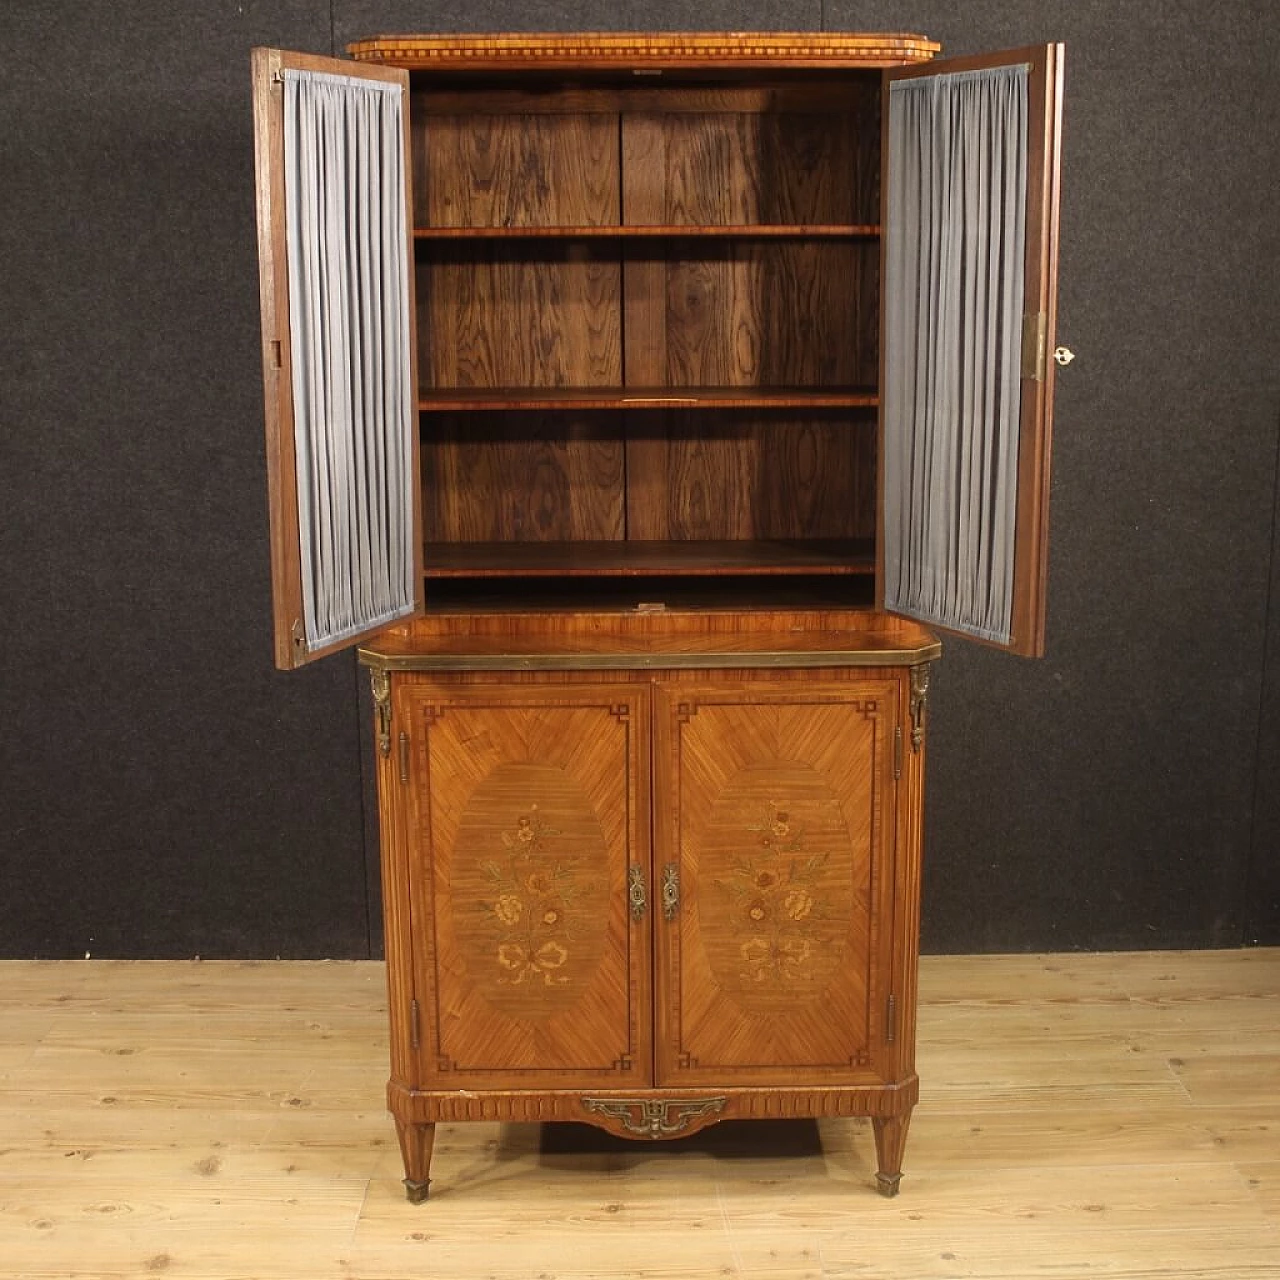 Inlaid wood double-bodied bookcase, early 20th century 1071254